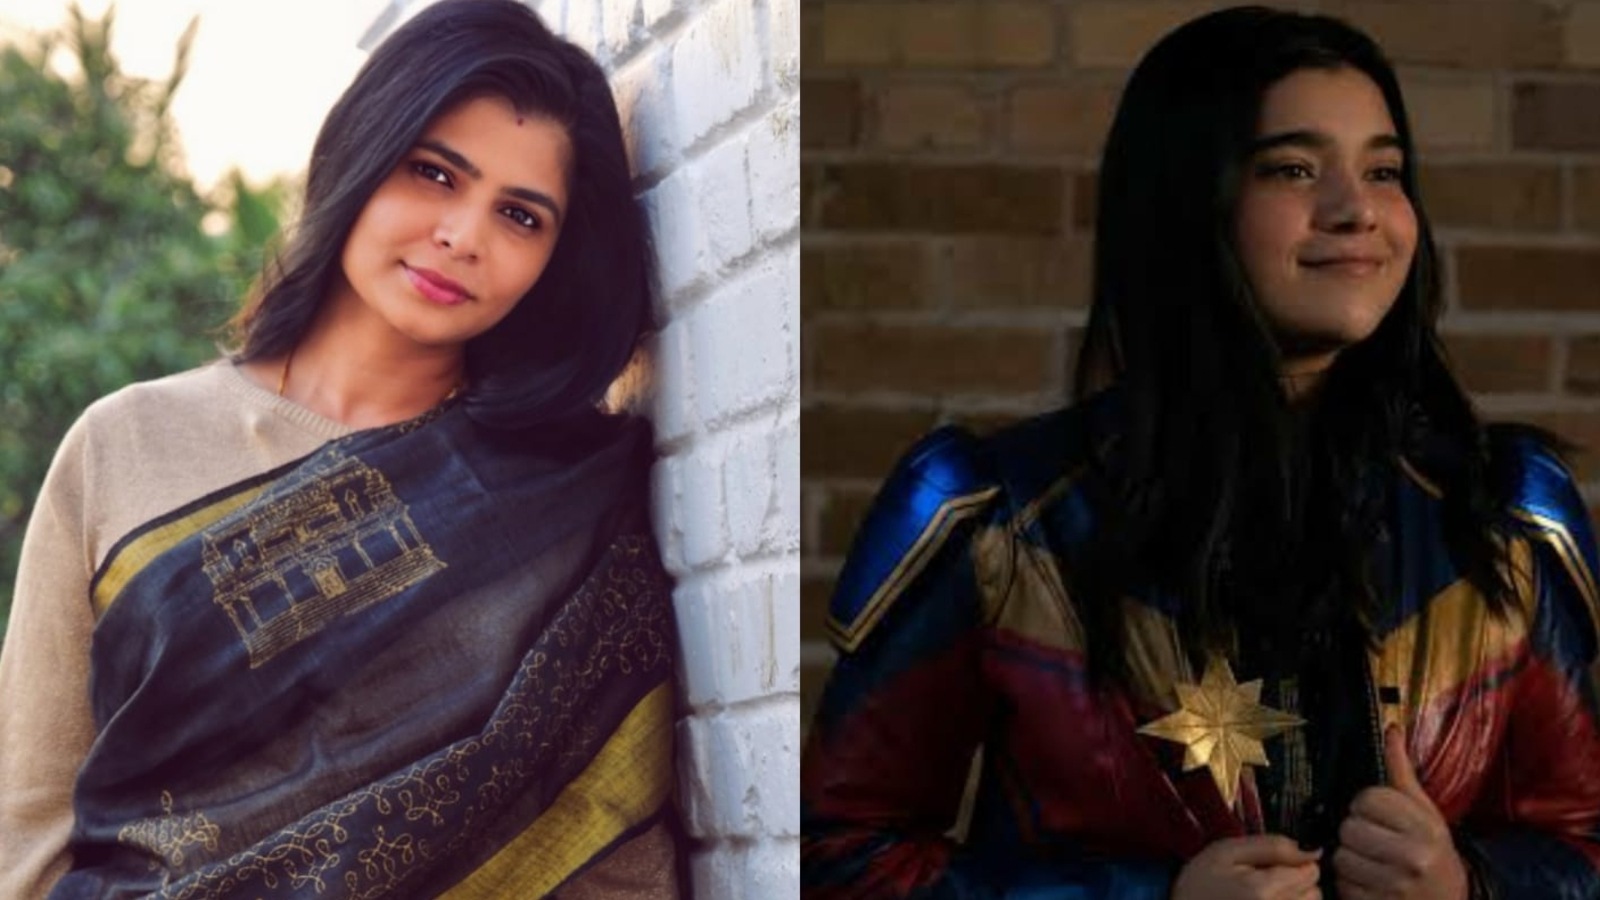 Chinmayi Sripada excited to see her song Tere Bina in Ms Marvel: ‘Nice to see my name in a Marvel show’